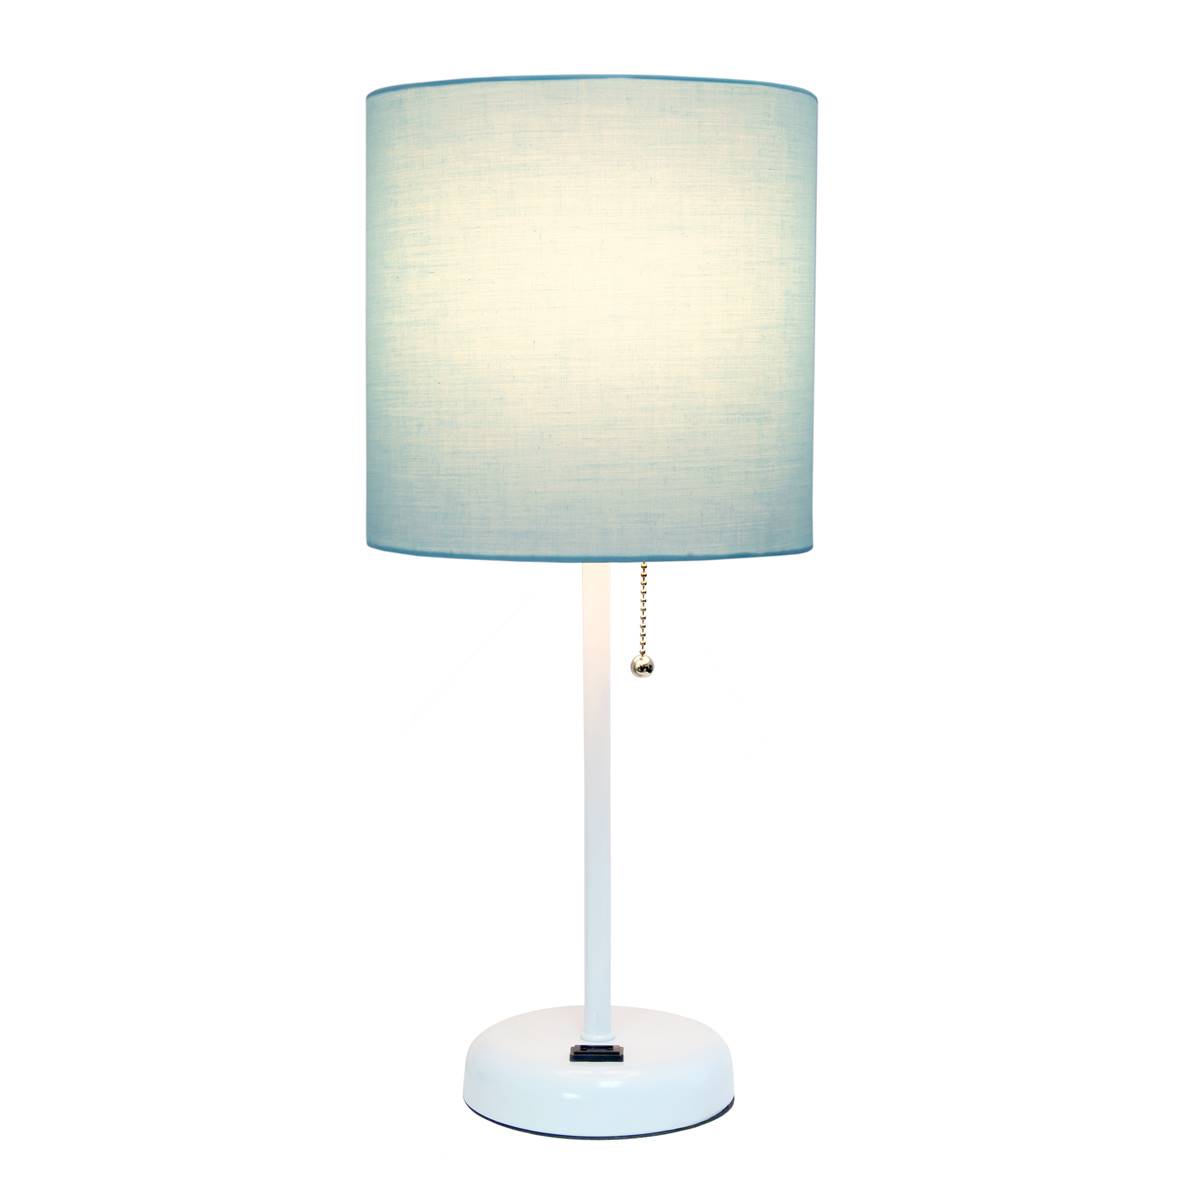 LimeLights Stick Lamp W/Charging Outlet & Fabric Shade